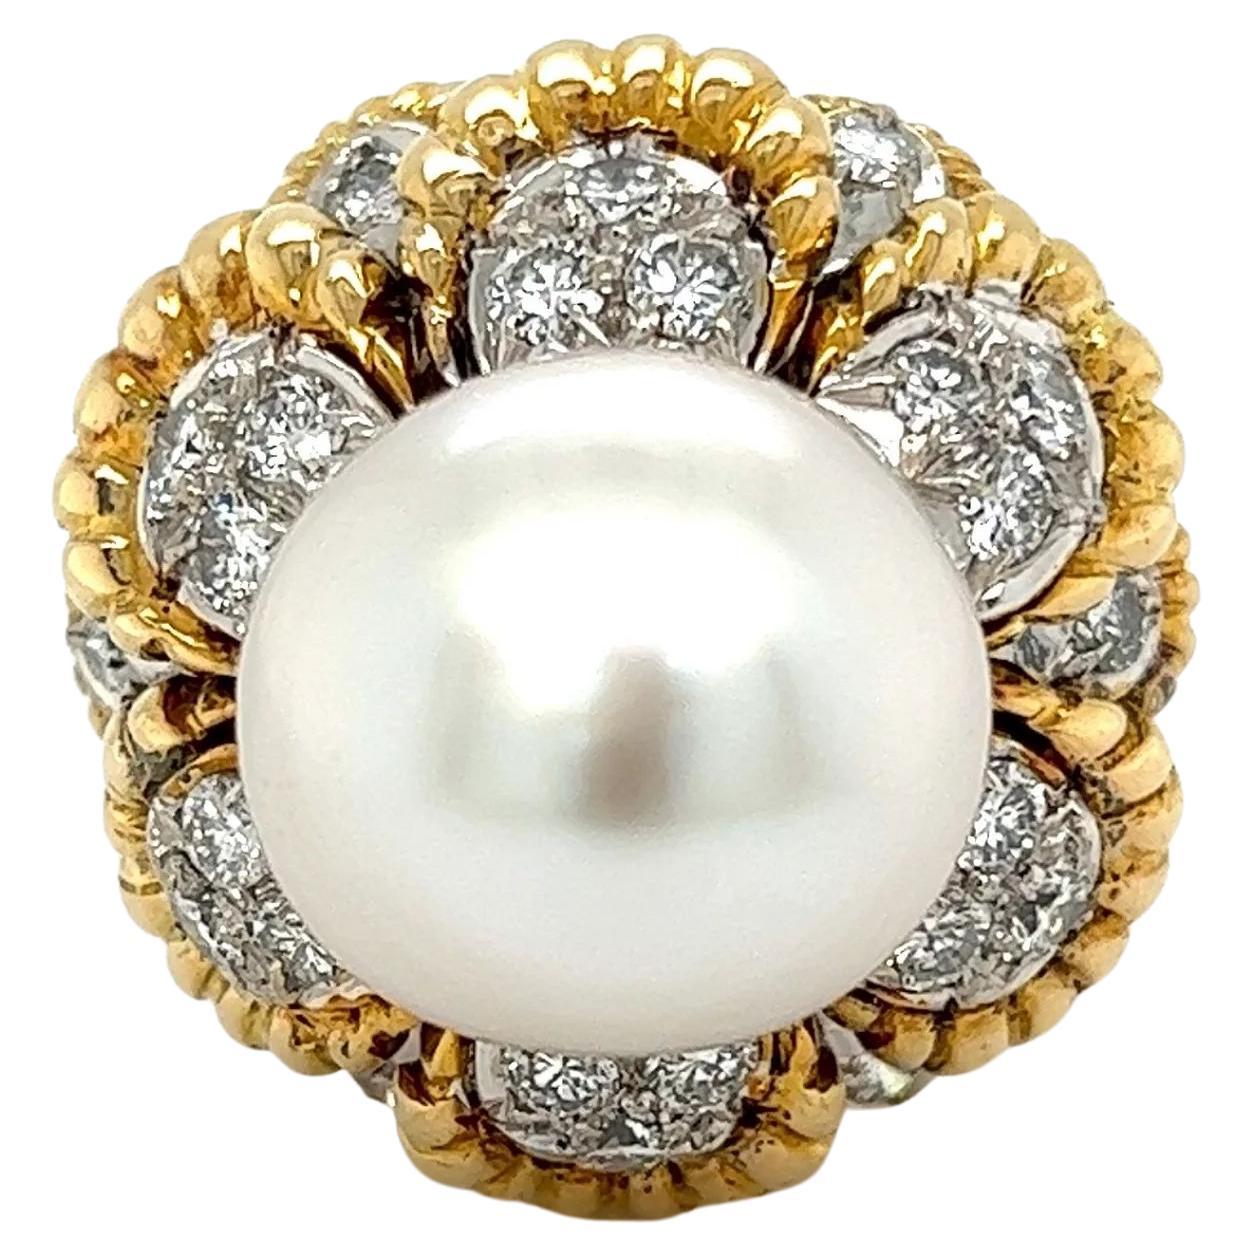 Vintage Pearl and Diamond Cocktail Ring Estate Fine Jewelry